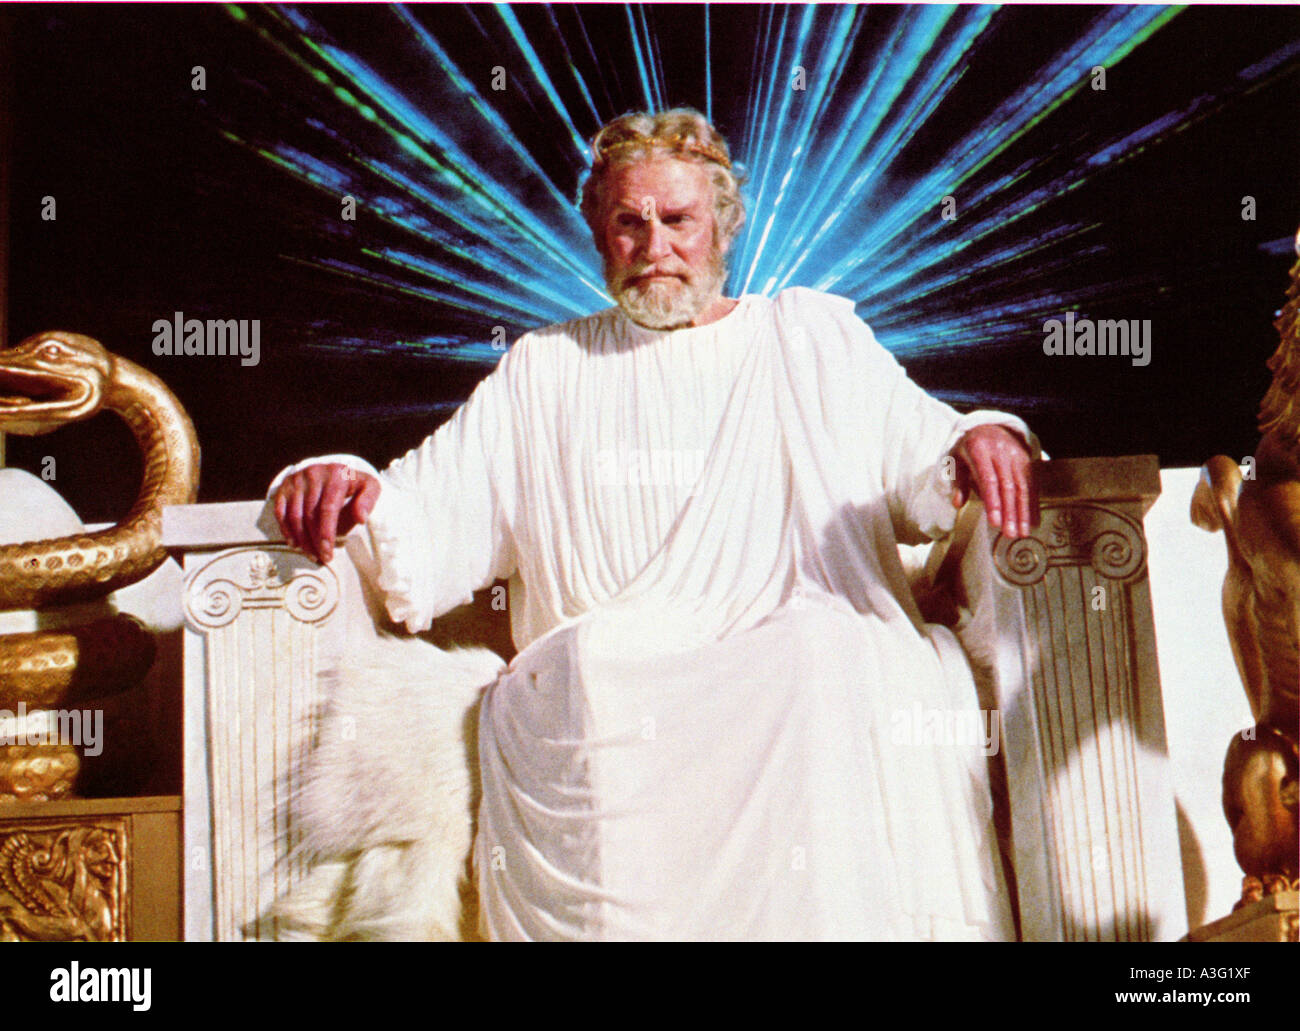 CLASH OF THE TITANS 1981 MGM film with Laurence Olivier as Zeus Stock Photo